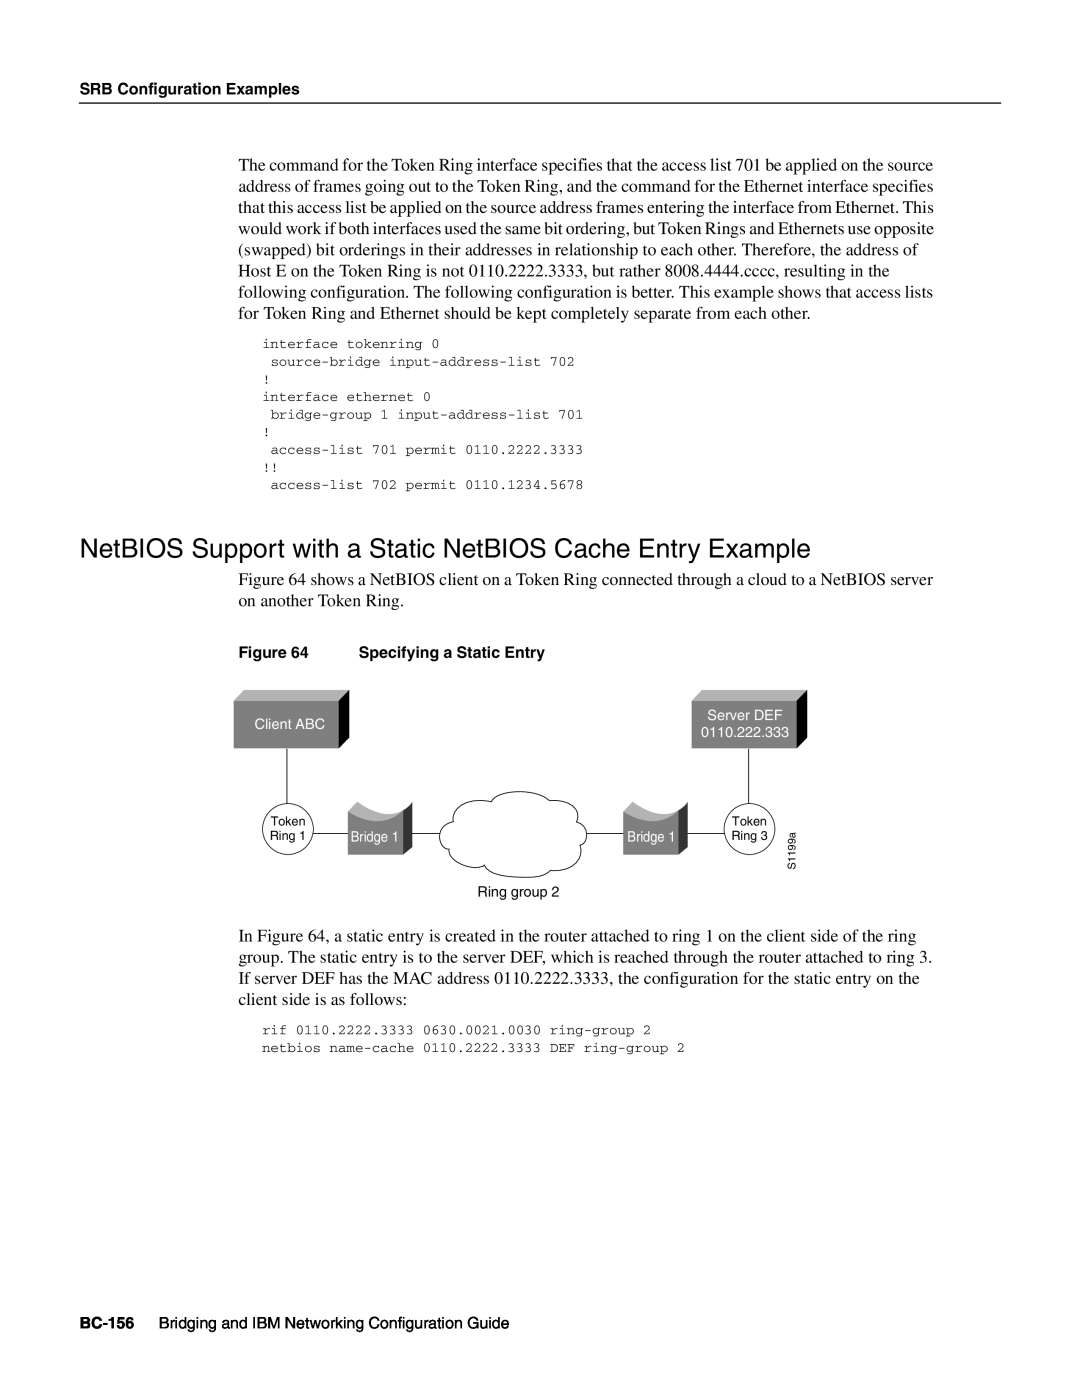 Cisco Systems BC-109 manual NetBIOS Support with a Static NetBIOS Cache Entry Example 